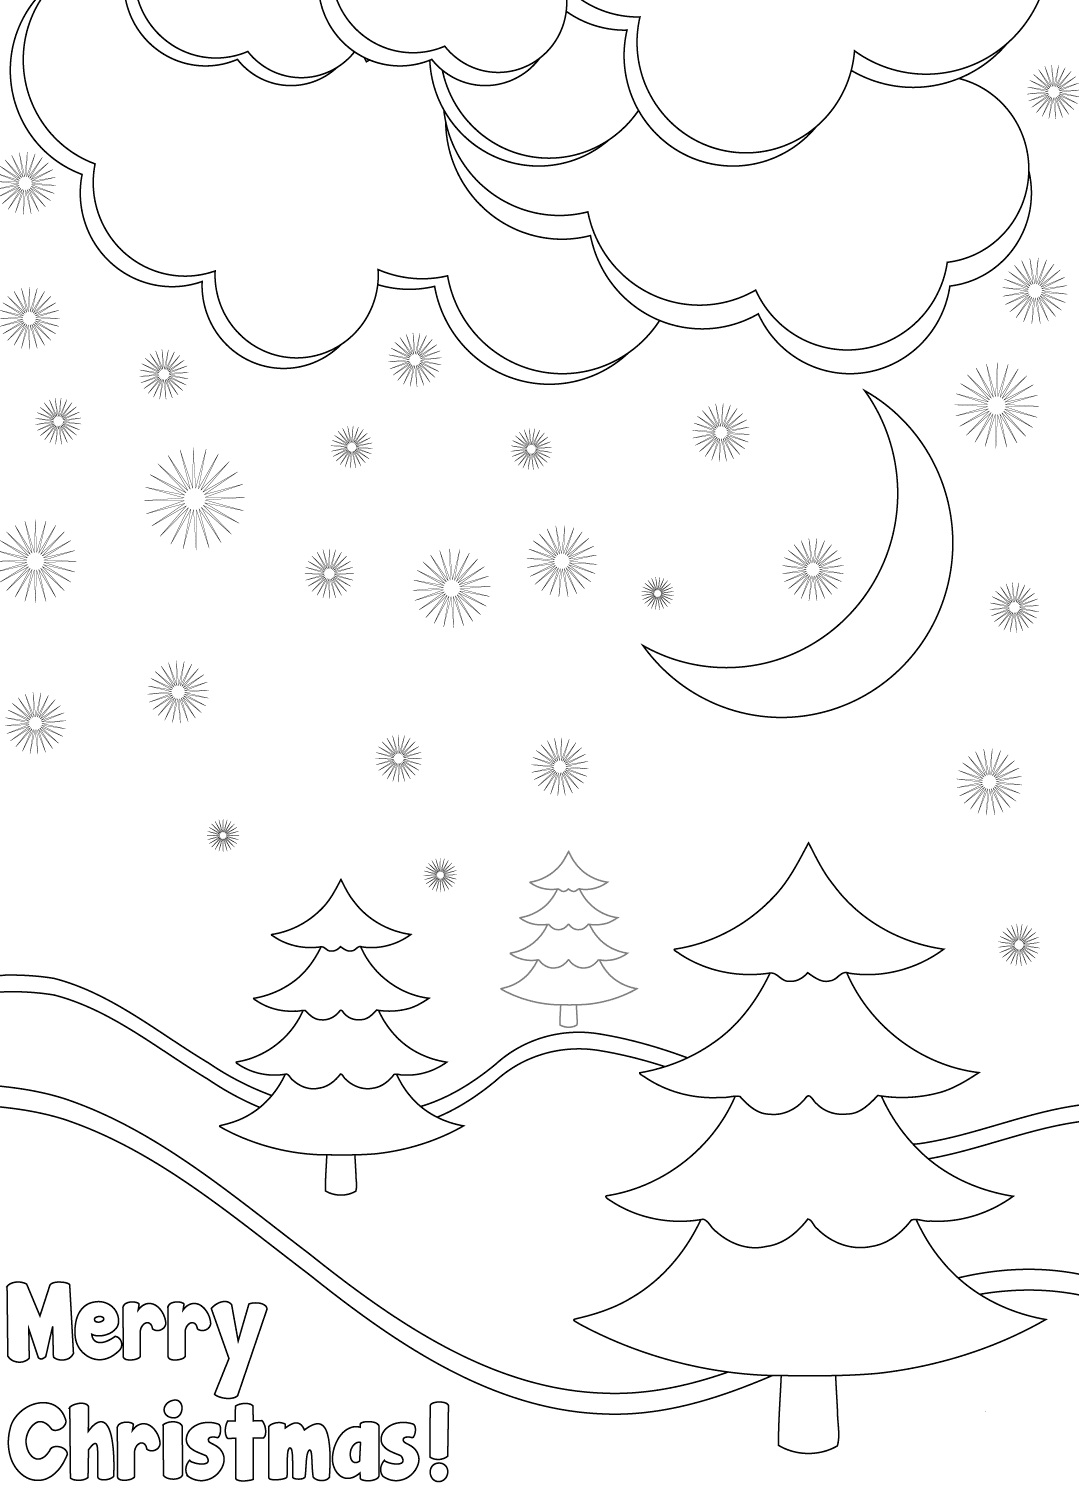 Winter Landscape on Christmas Day Coloring Page